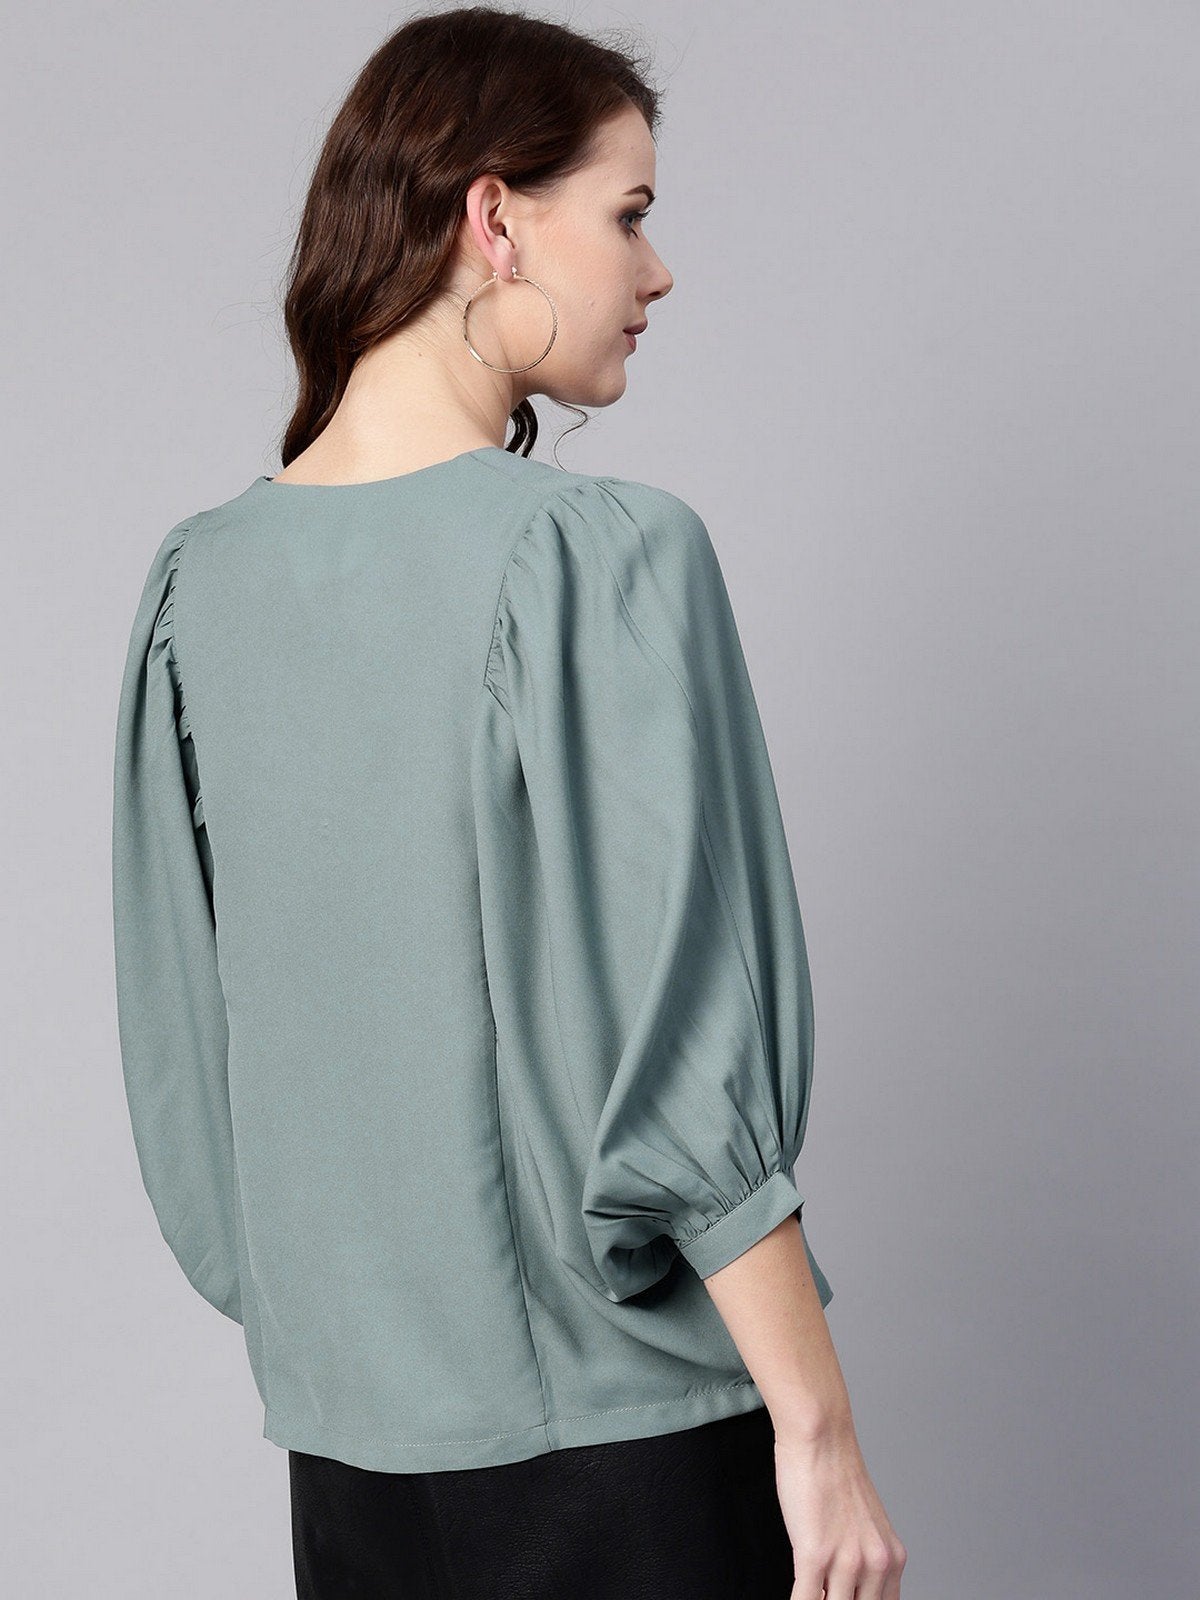 Women's Solid Flared Cape Top - Pannkh